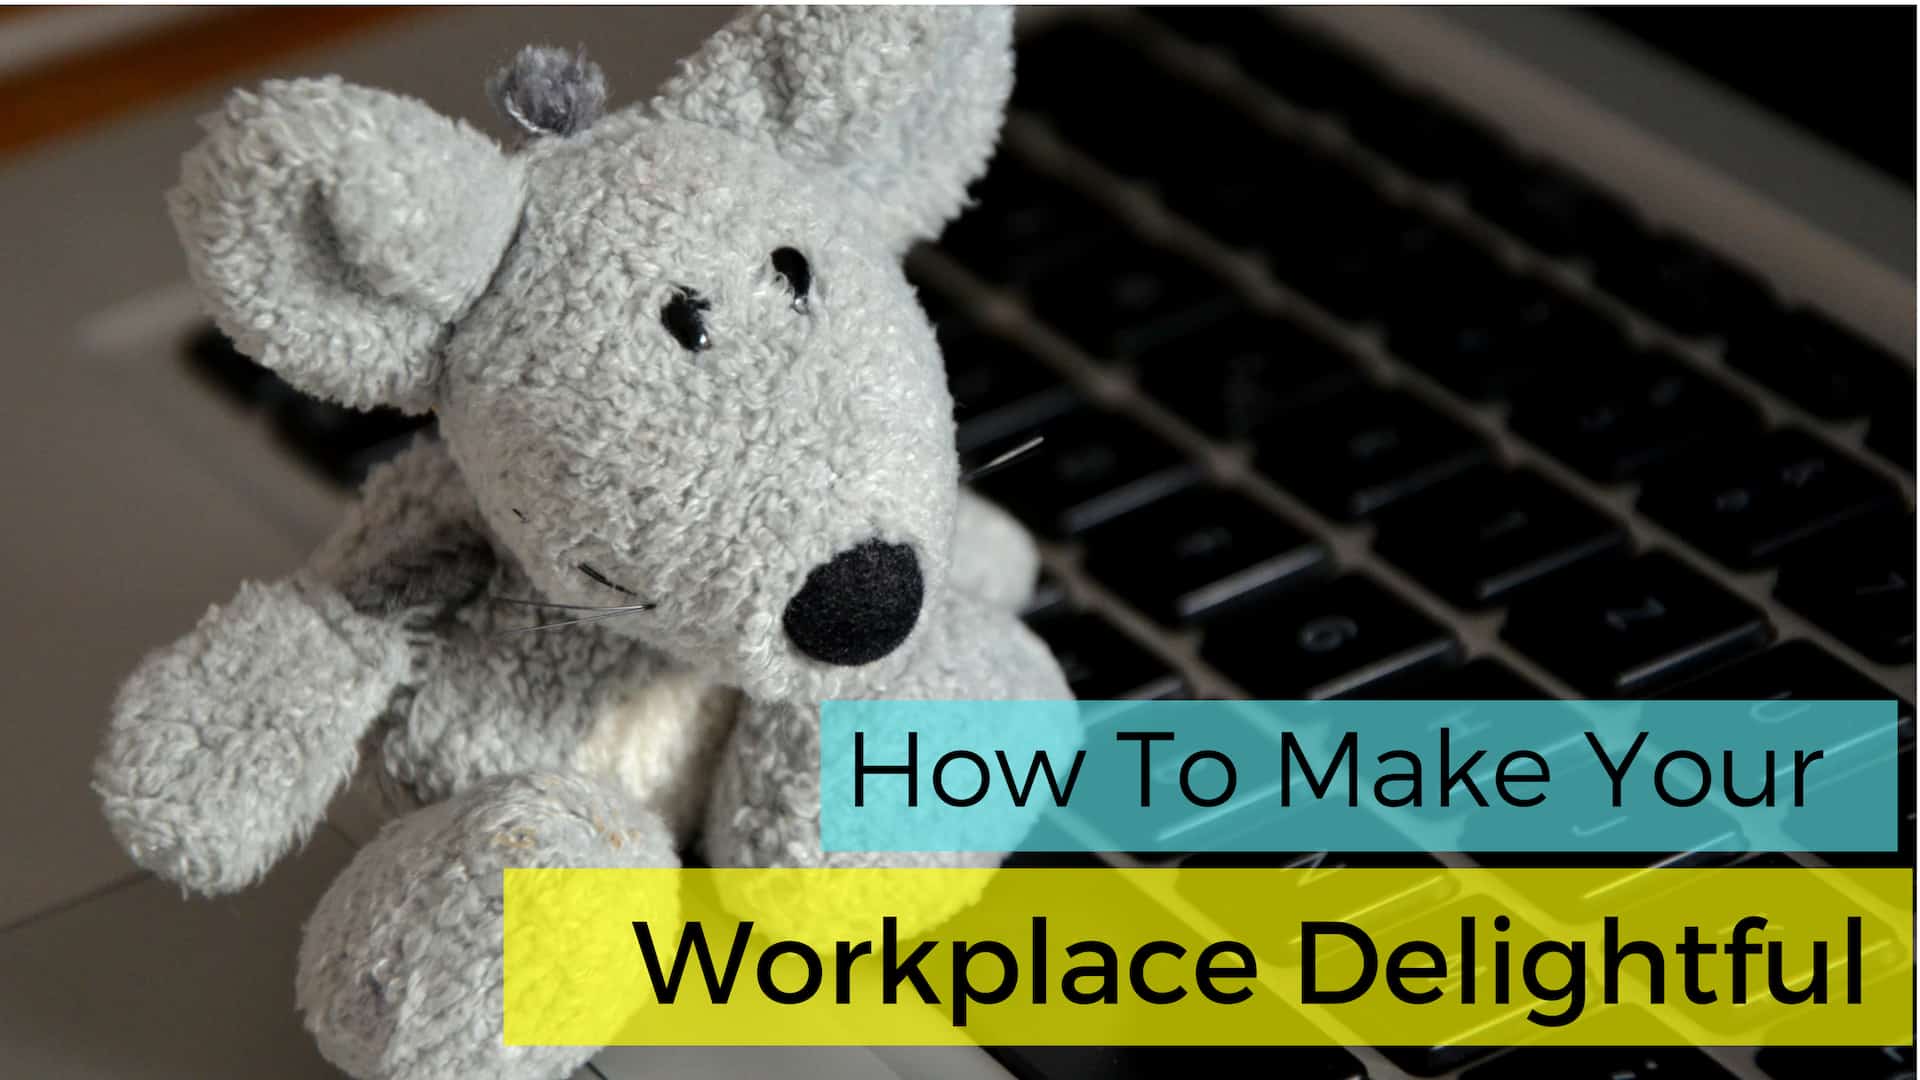 How To Make Your Workplace Delightful